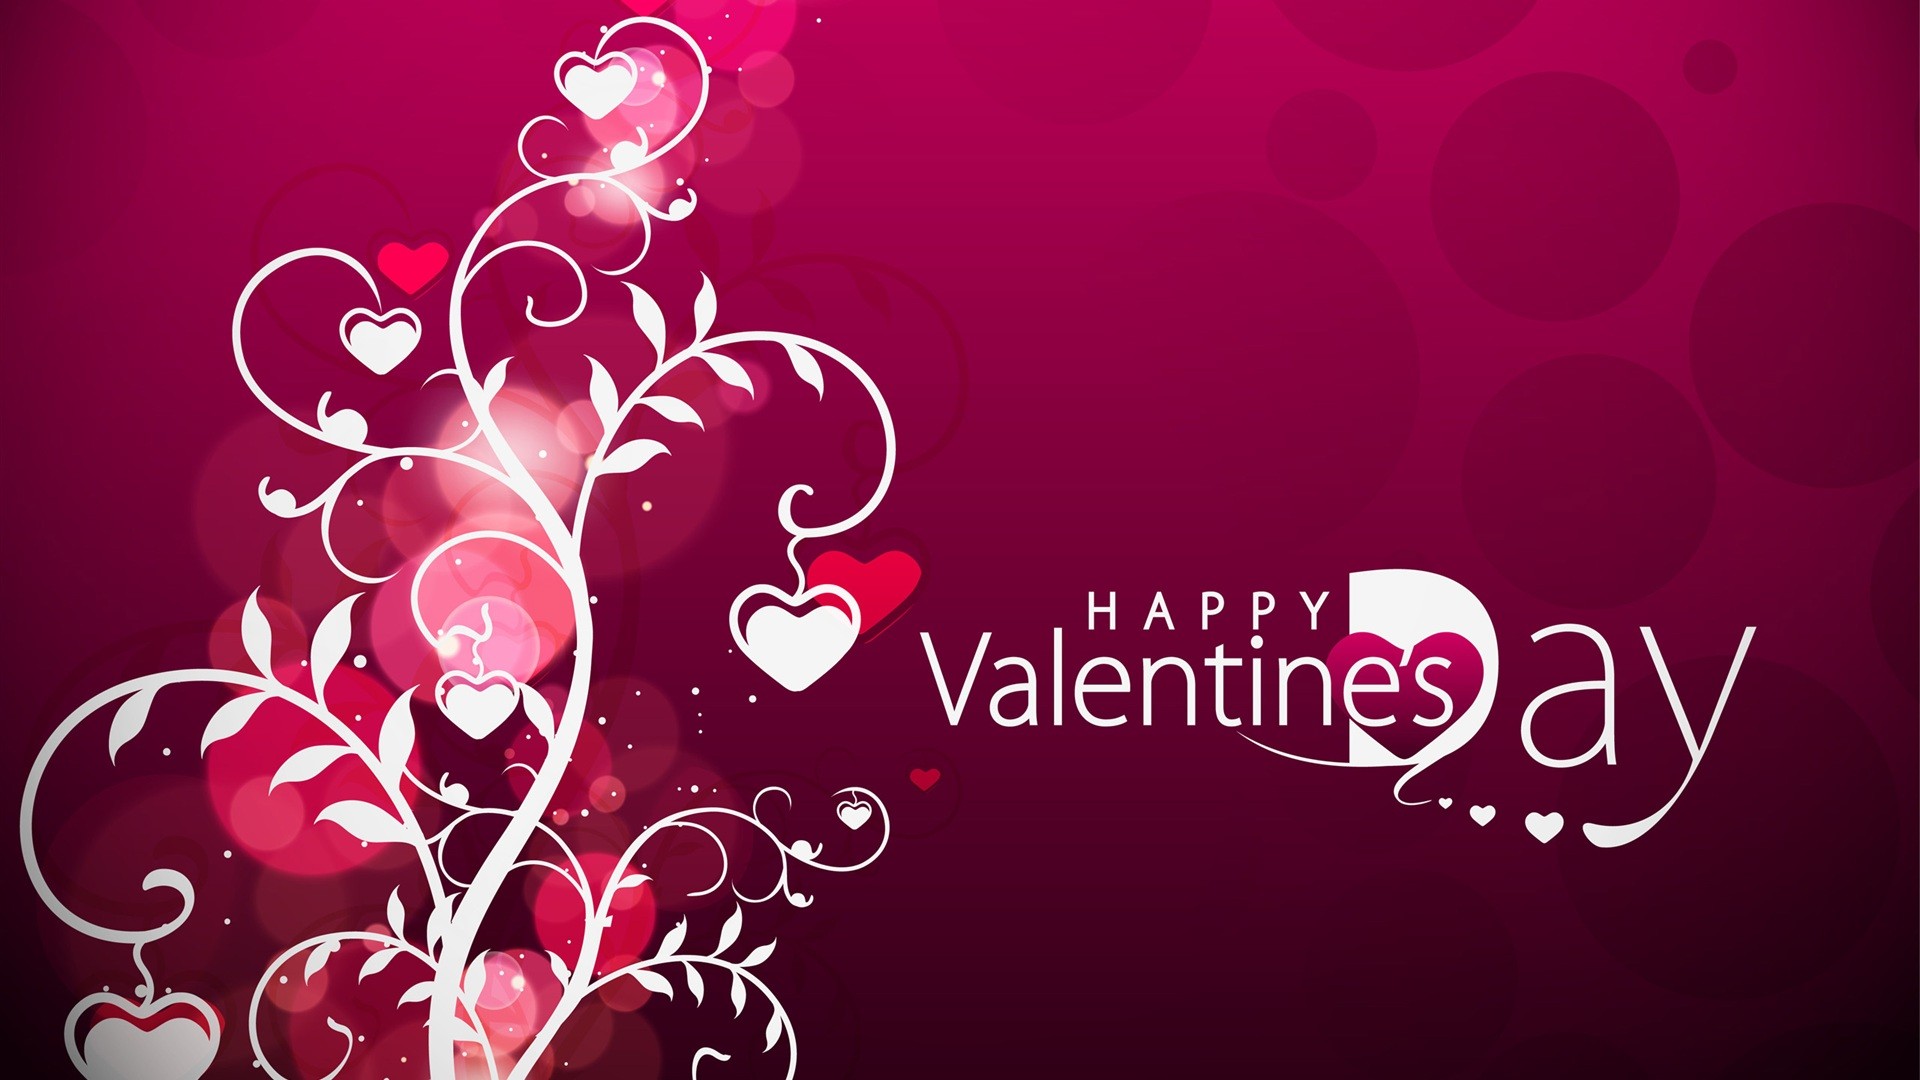 Velentines day wallpaper for the month of love (2)